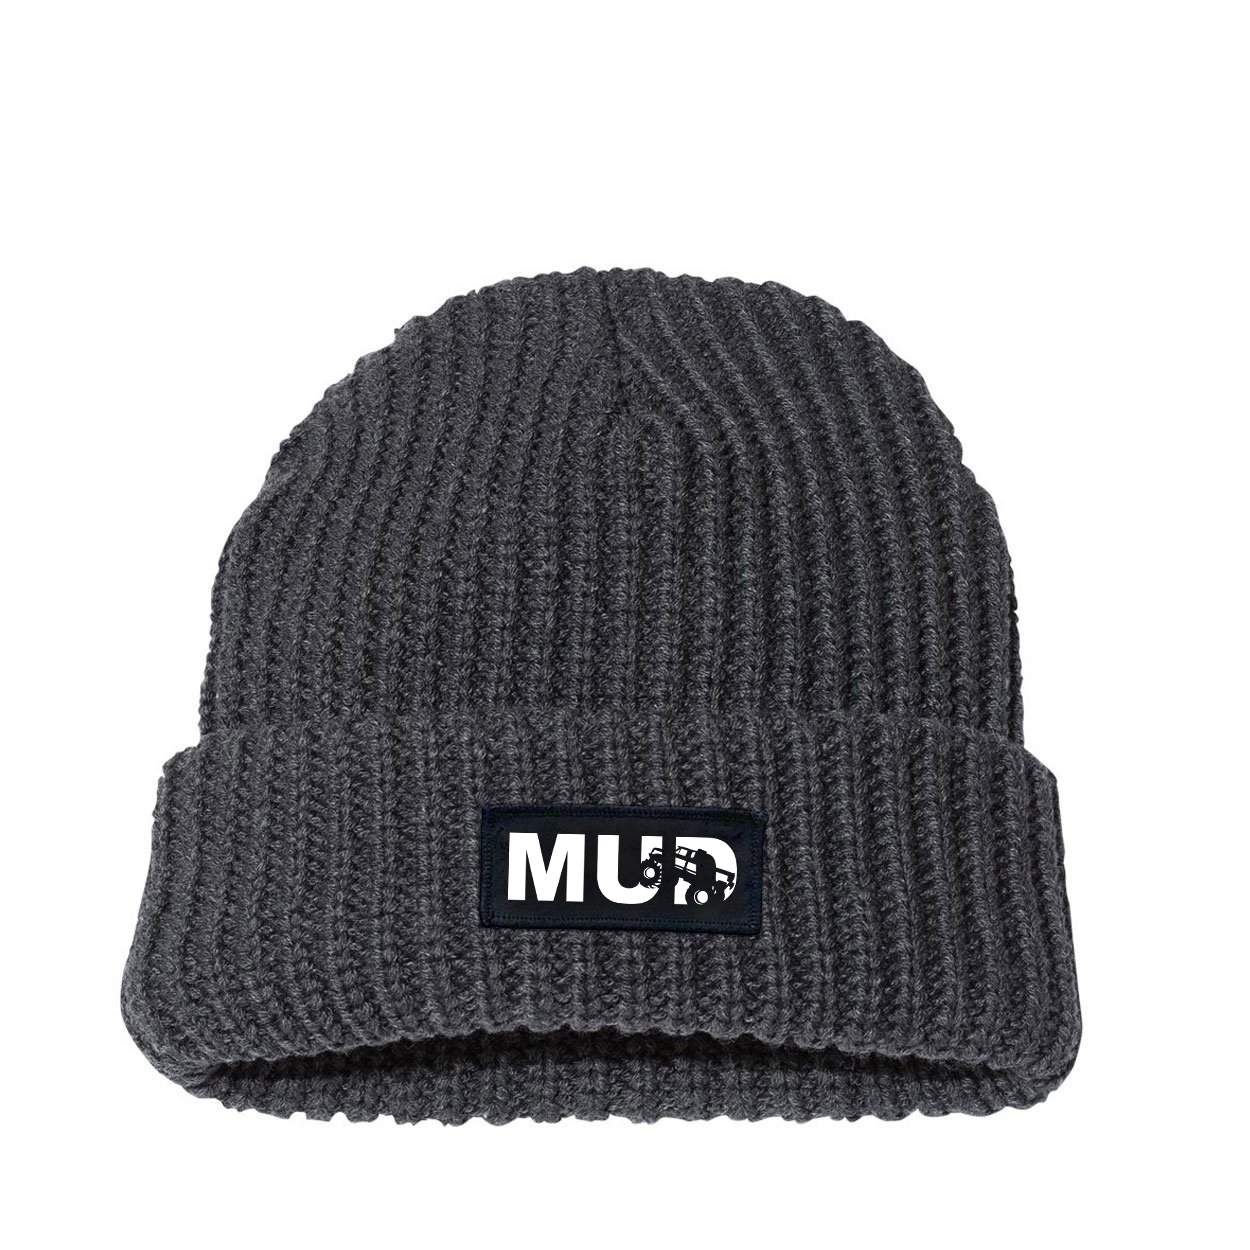 Mud Truck Logo Night Out Woven Patch Roll Up Jumbo Chunky Knit Beanie Charcoal (White Logo)